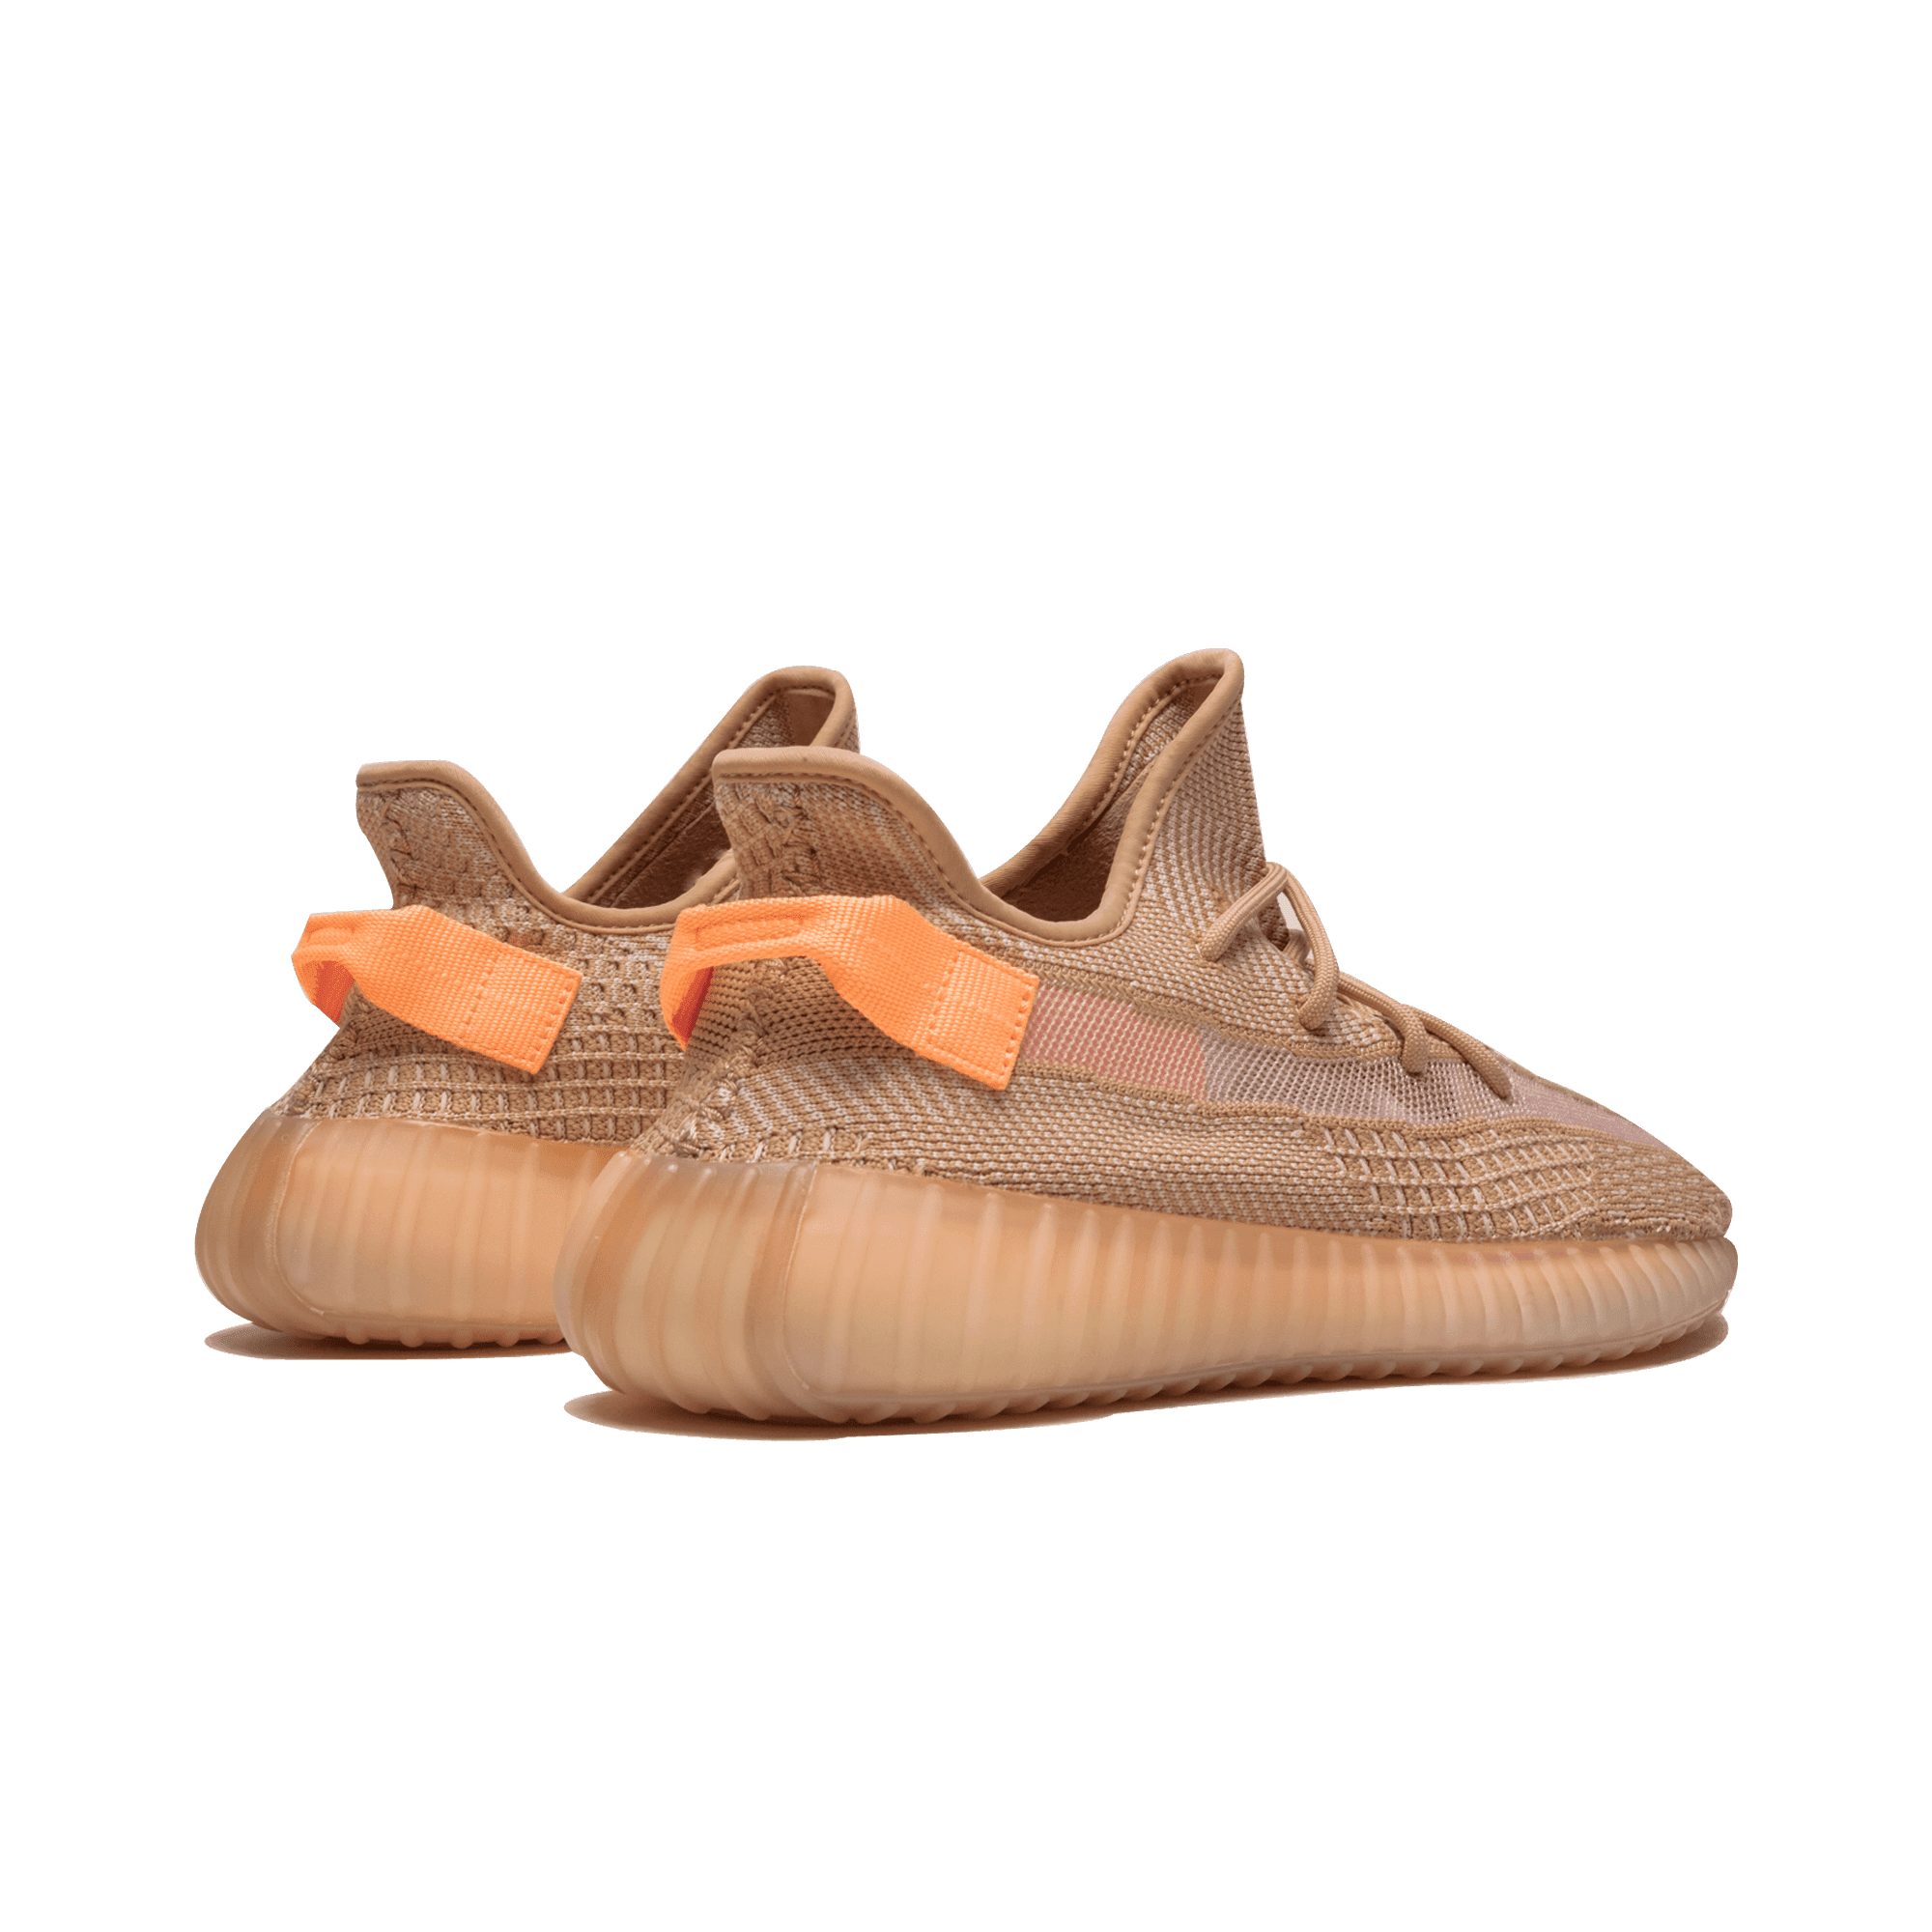 YEEZY BOOST 350 V2 "CLAY" (4005108809800)